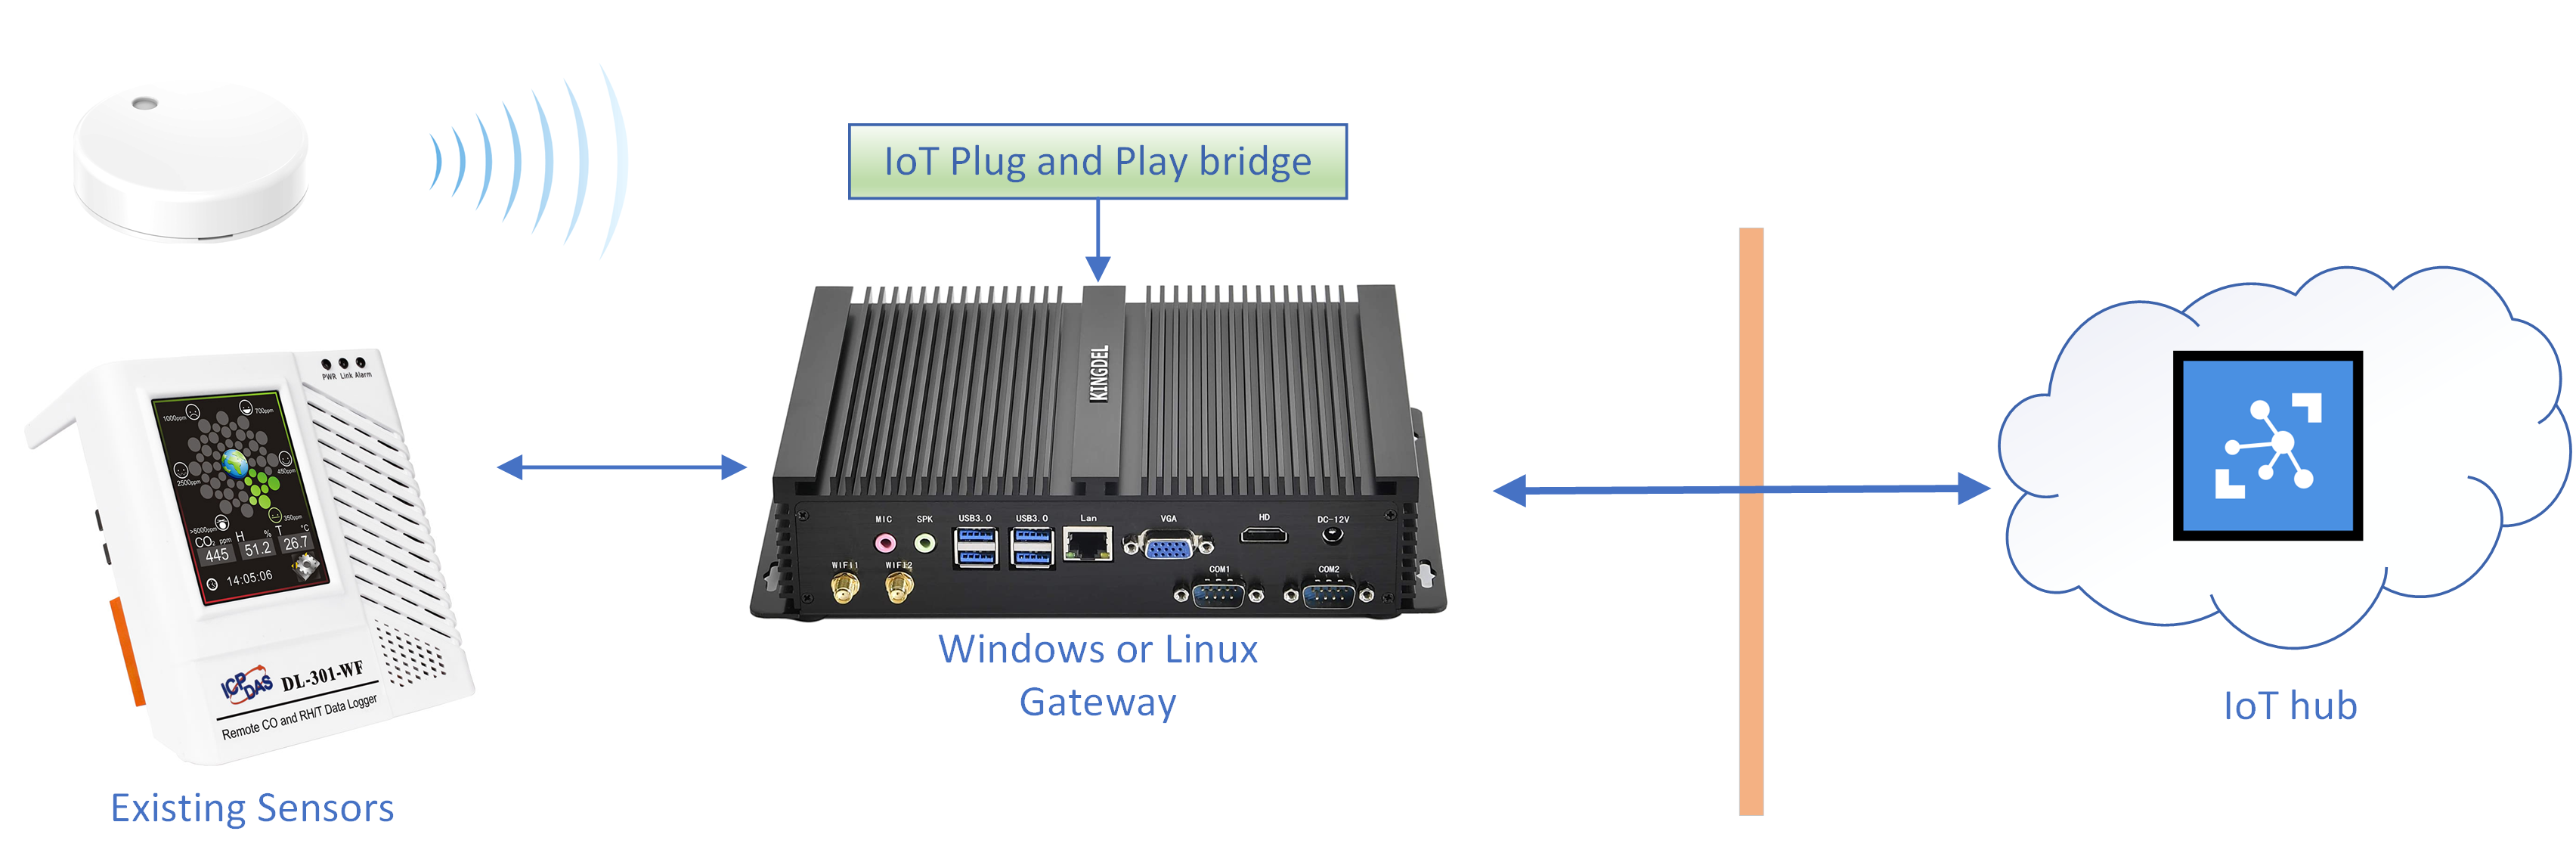 On the left hand side there are a couple of existing sensors attached (both wired and wireless) to a Windows or Linux PC containing IoT Plug and Play bridge. The IoT Plug and Play bridge then connects to an IoT hub on the right side